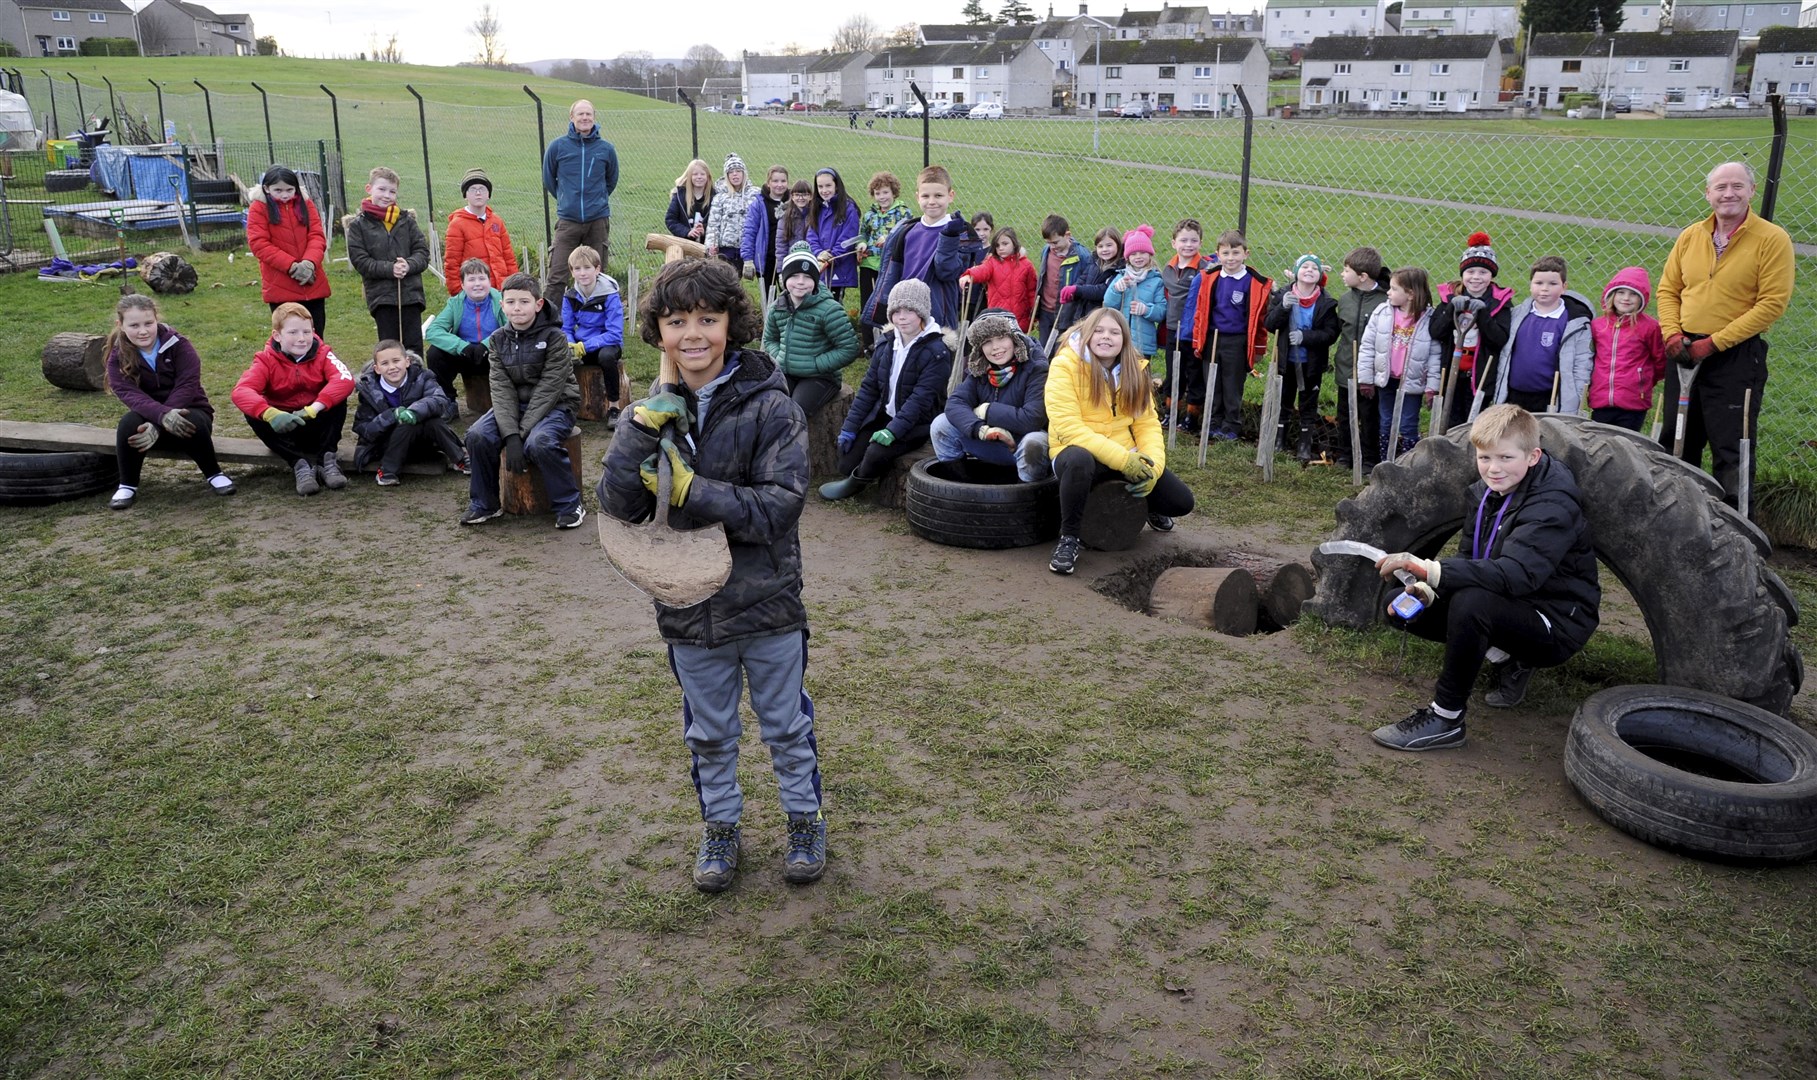 Primary 5/6 pupil Ty Ravello in the foreground, with pupils planting trees at Seafield Primary School.